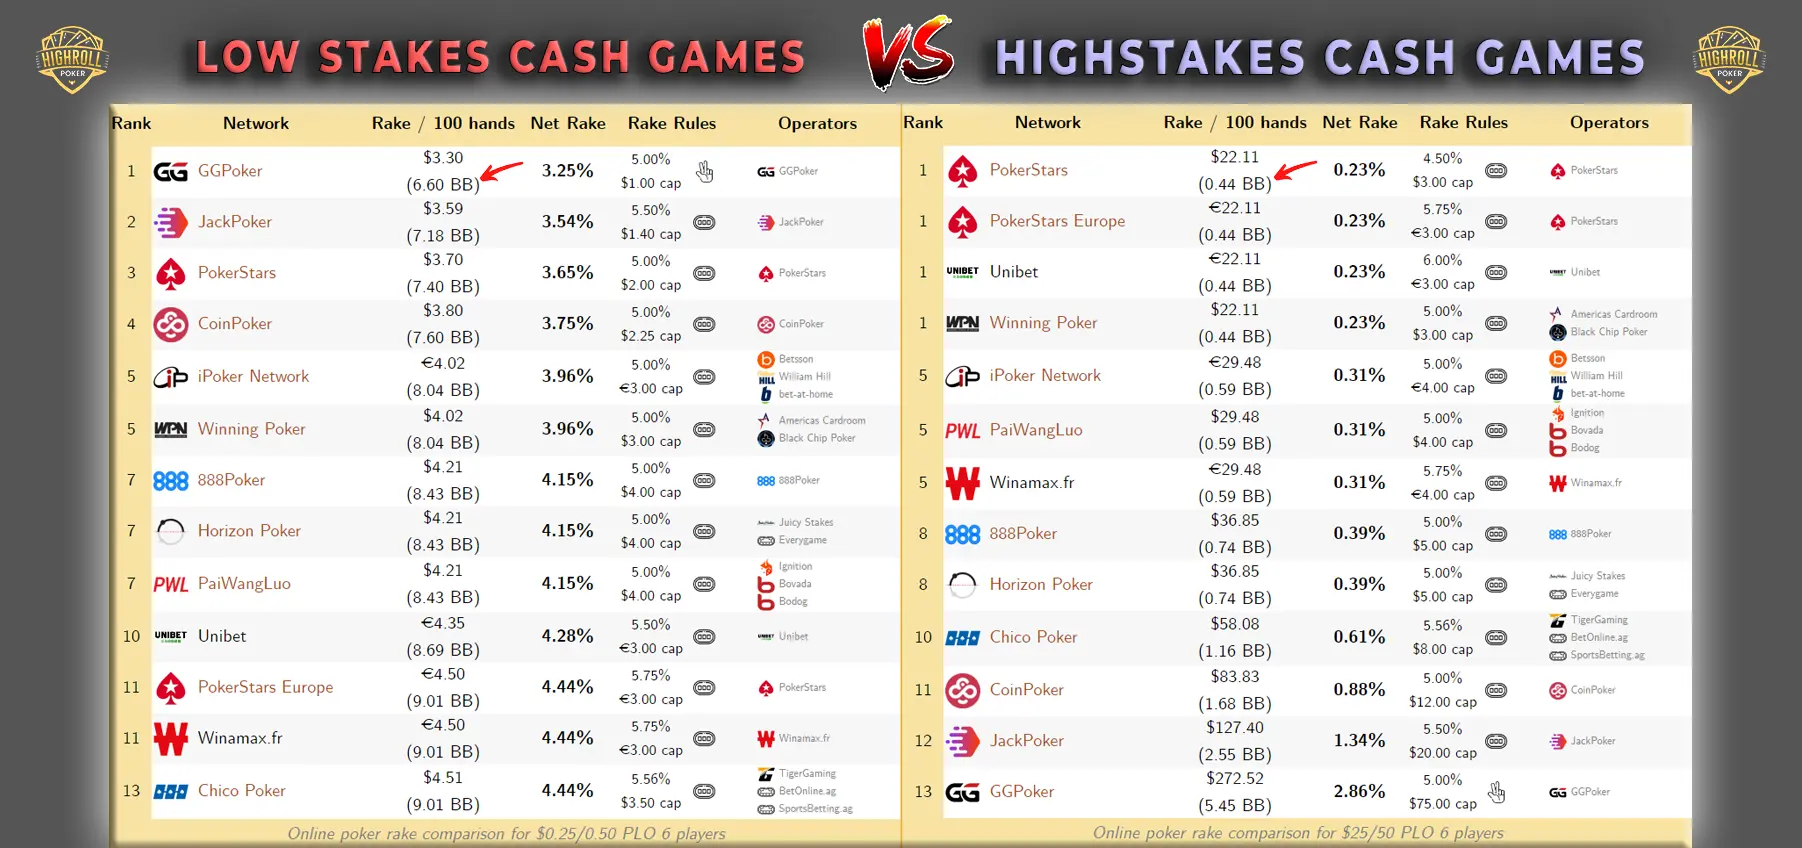 Infographic illustrating the difference between rake structure in low stakes online poker to high stakes online poker cash games.